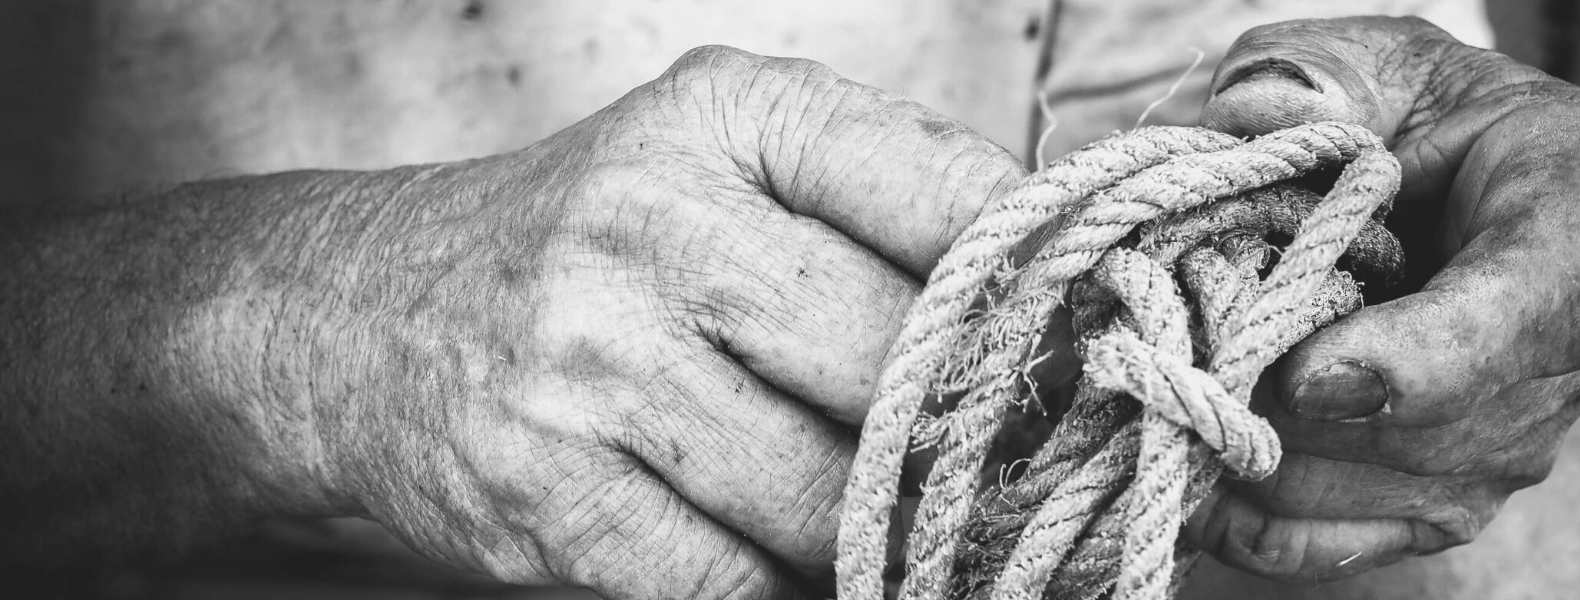 old hands and rope